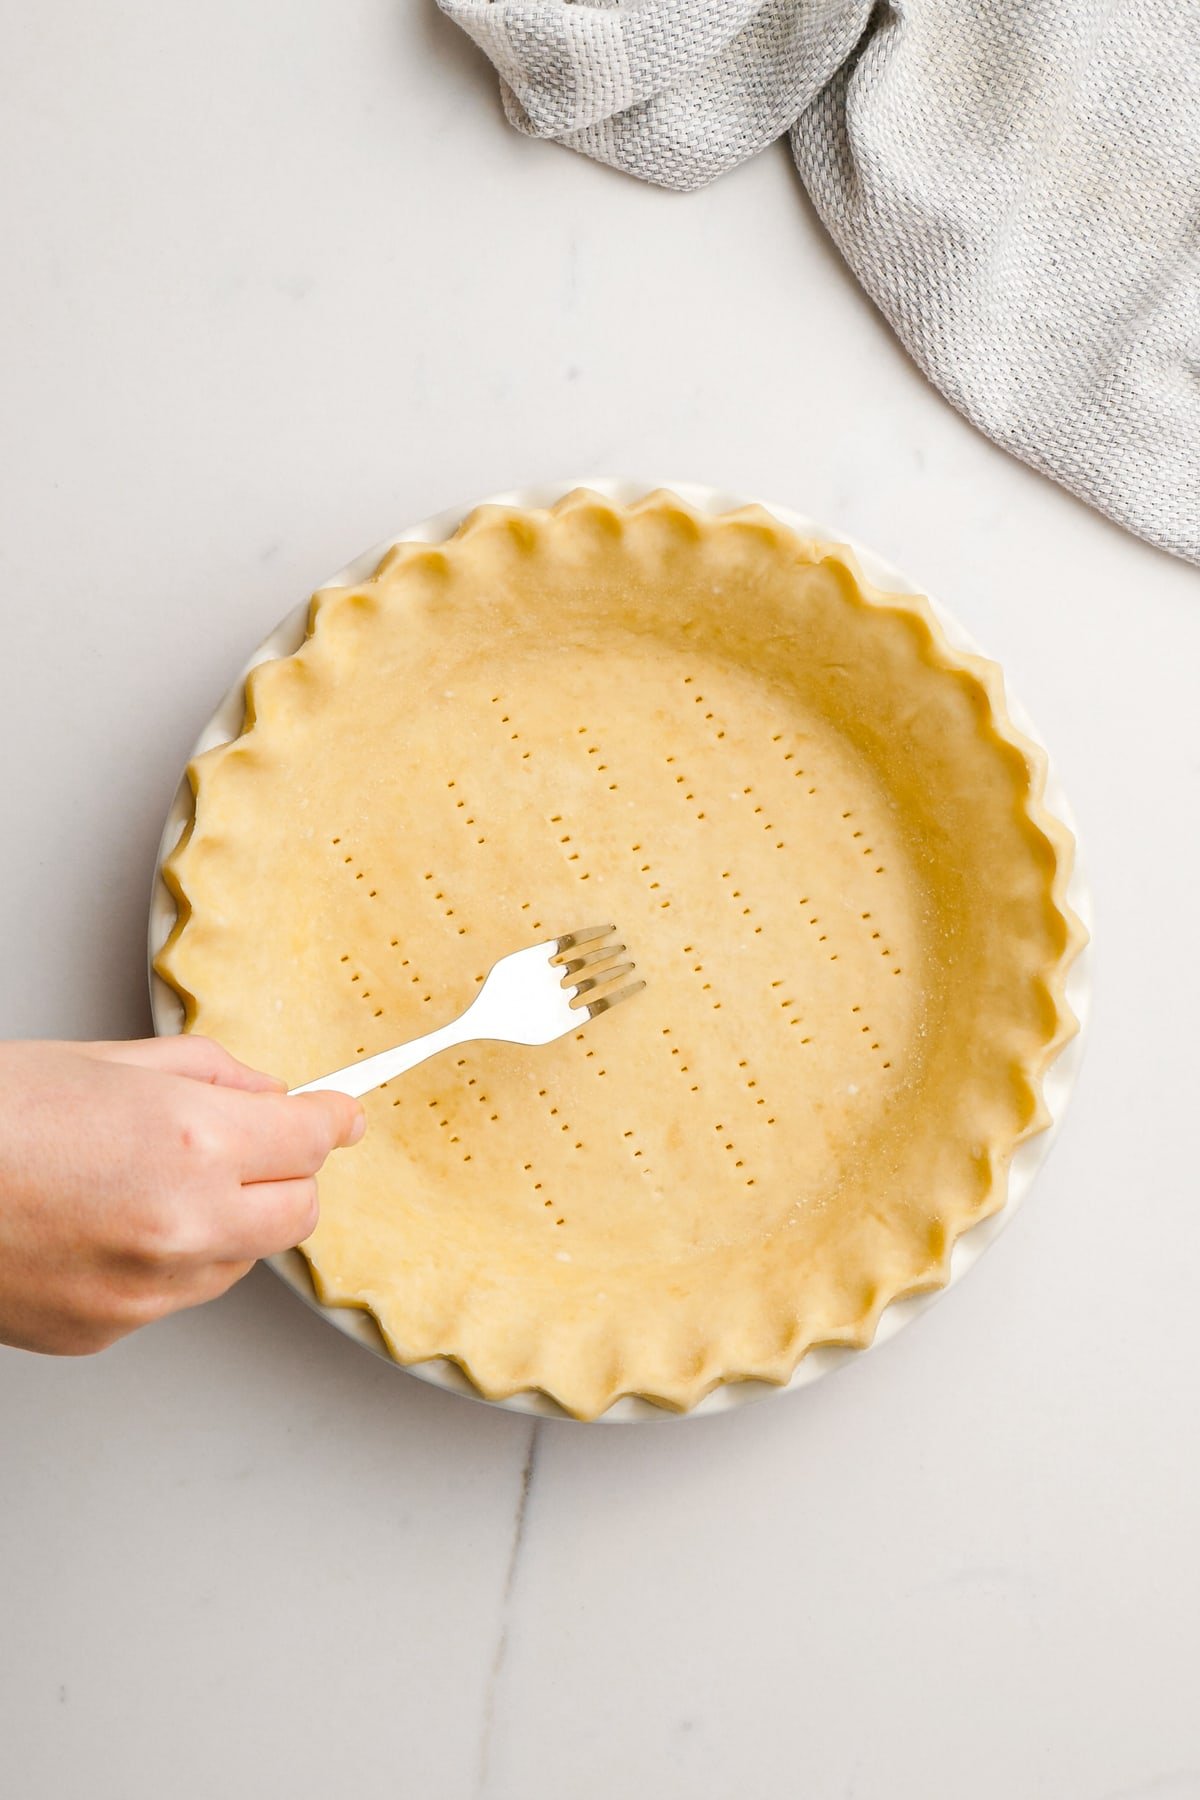 woman's hand piercing raw pie crust with fork